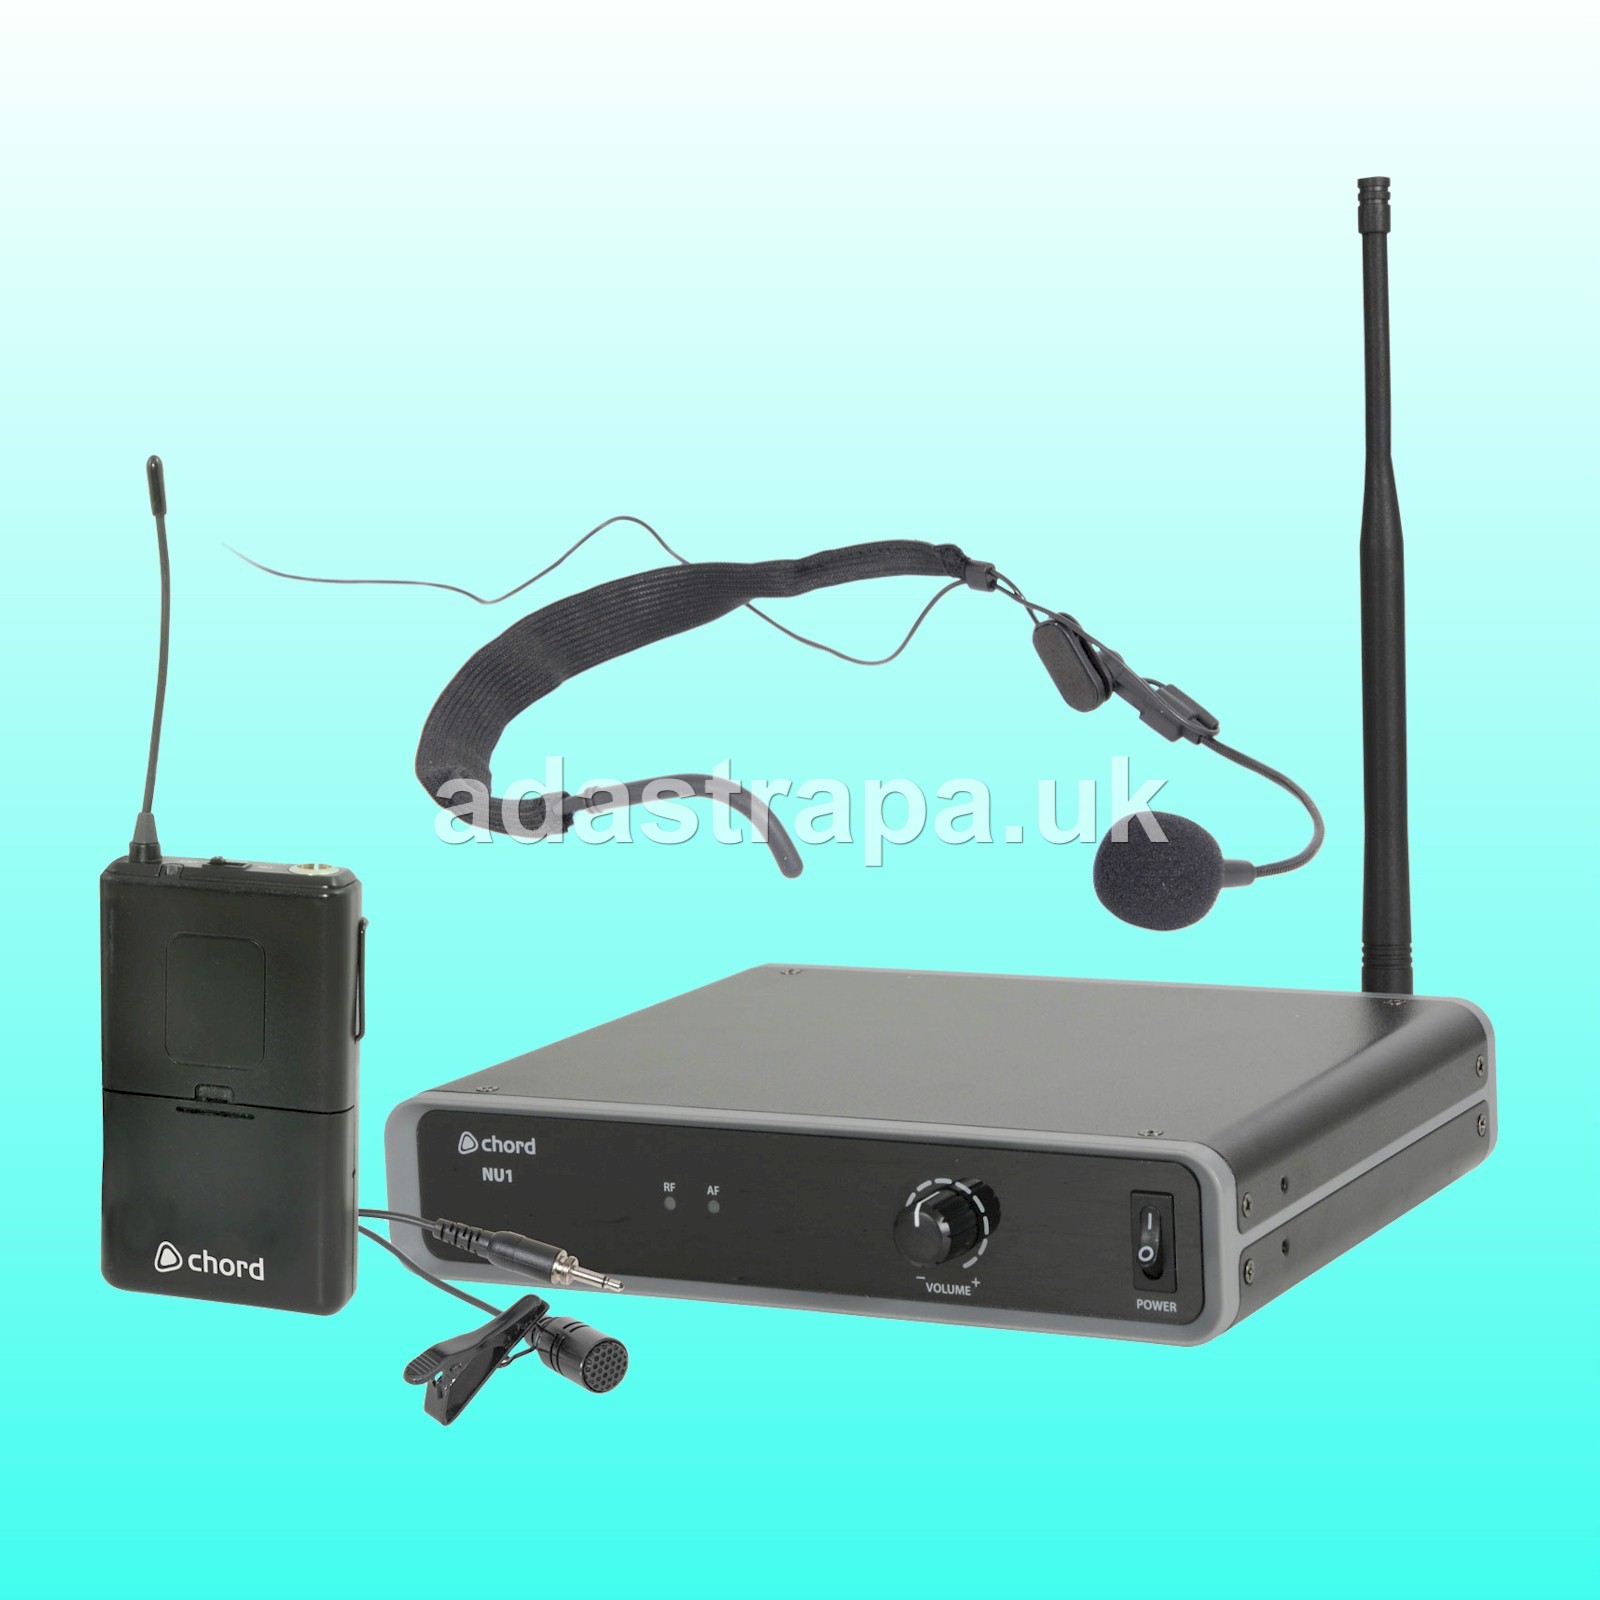 Chord NU1-N UHF Wireless Radio Microphone System Neckband and Lapel 863.1MHz - 171.983UK